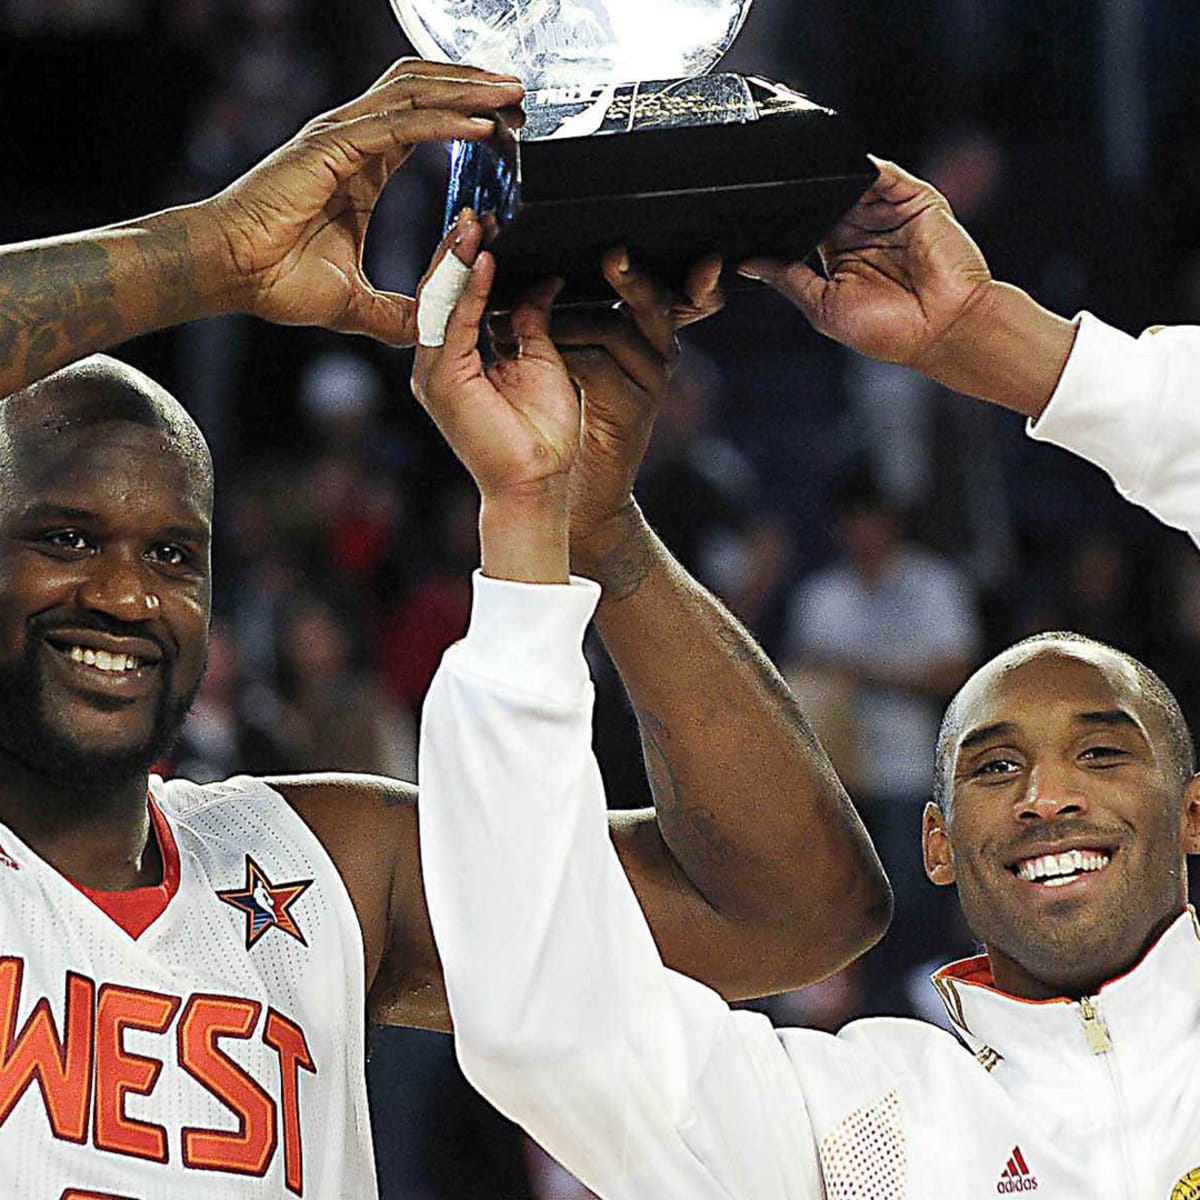 The NBA will honor Kobe Bryant with a new NBA All-Star Game format